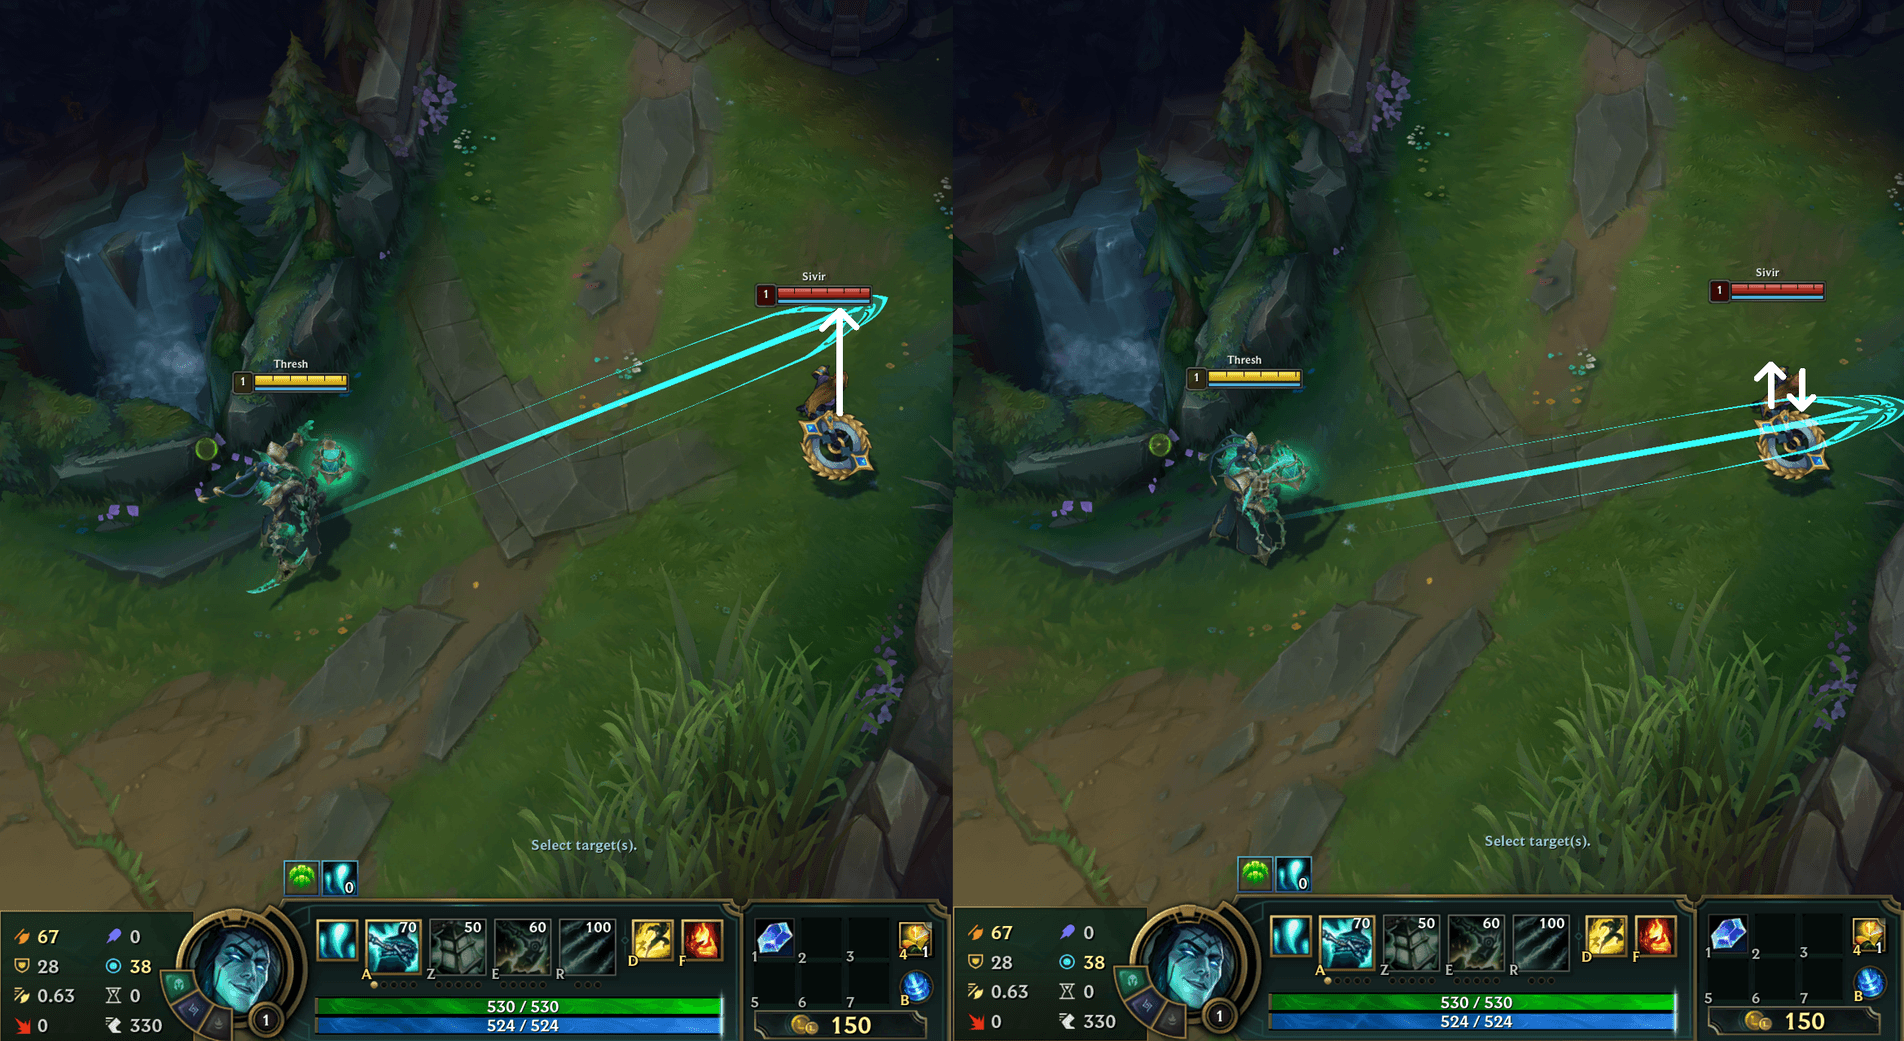 How to Play Thresh and Land his Hooks